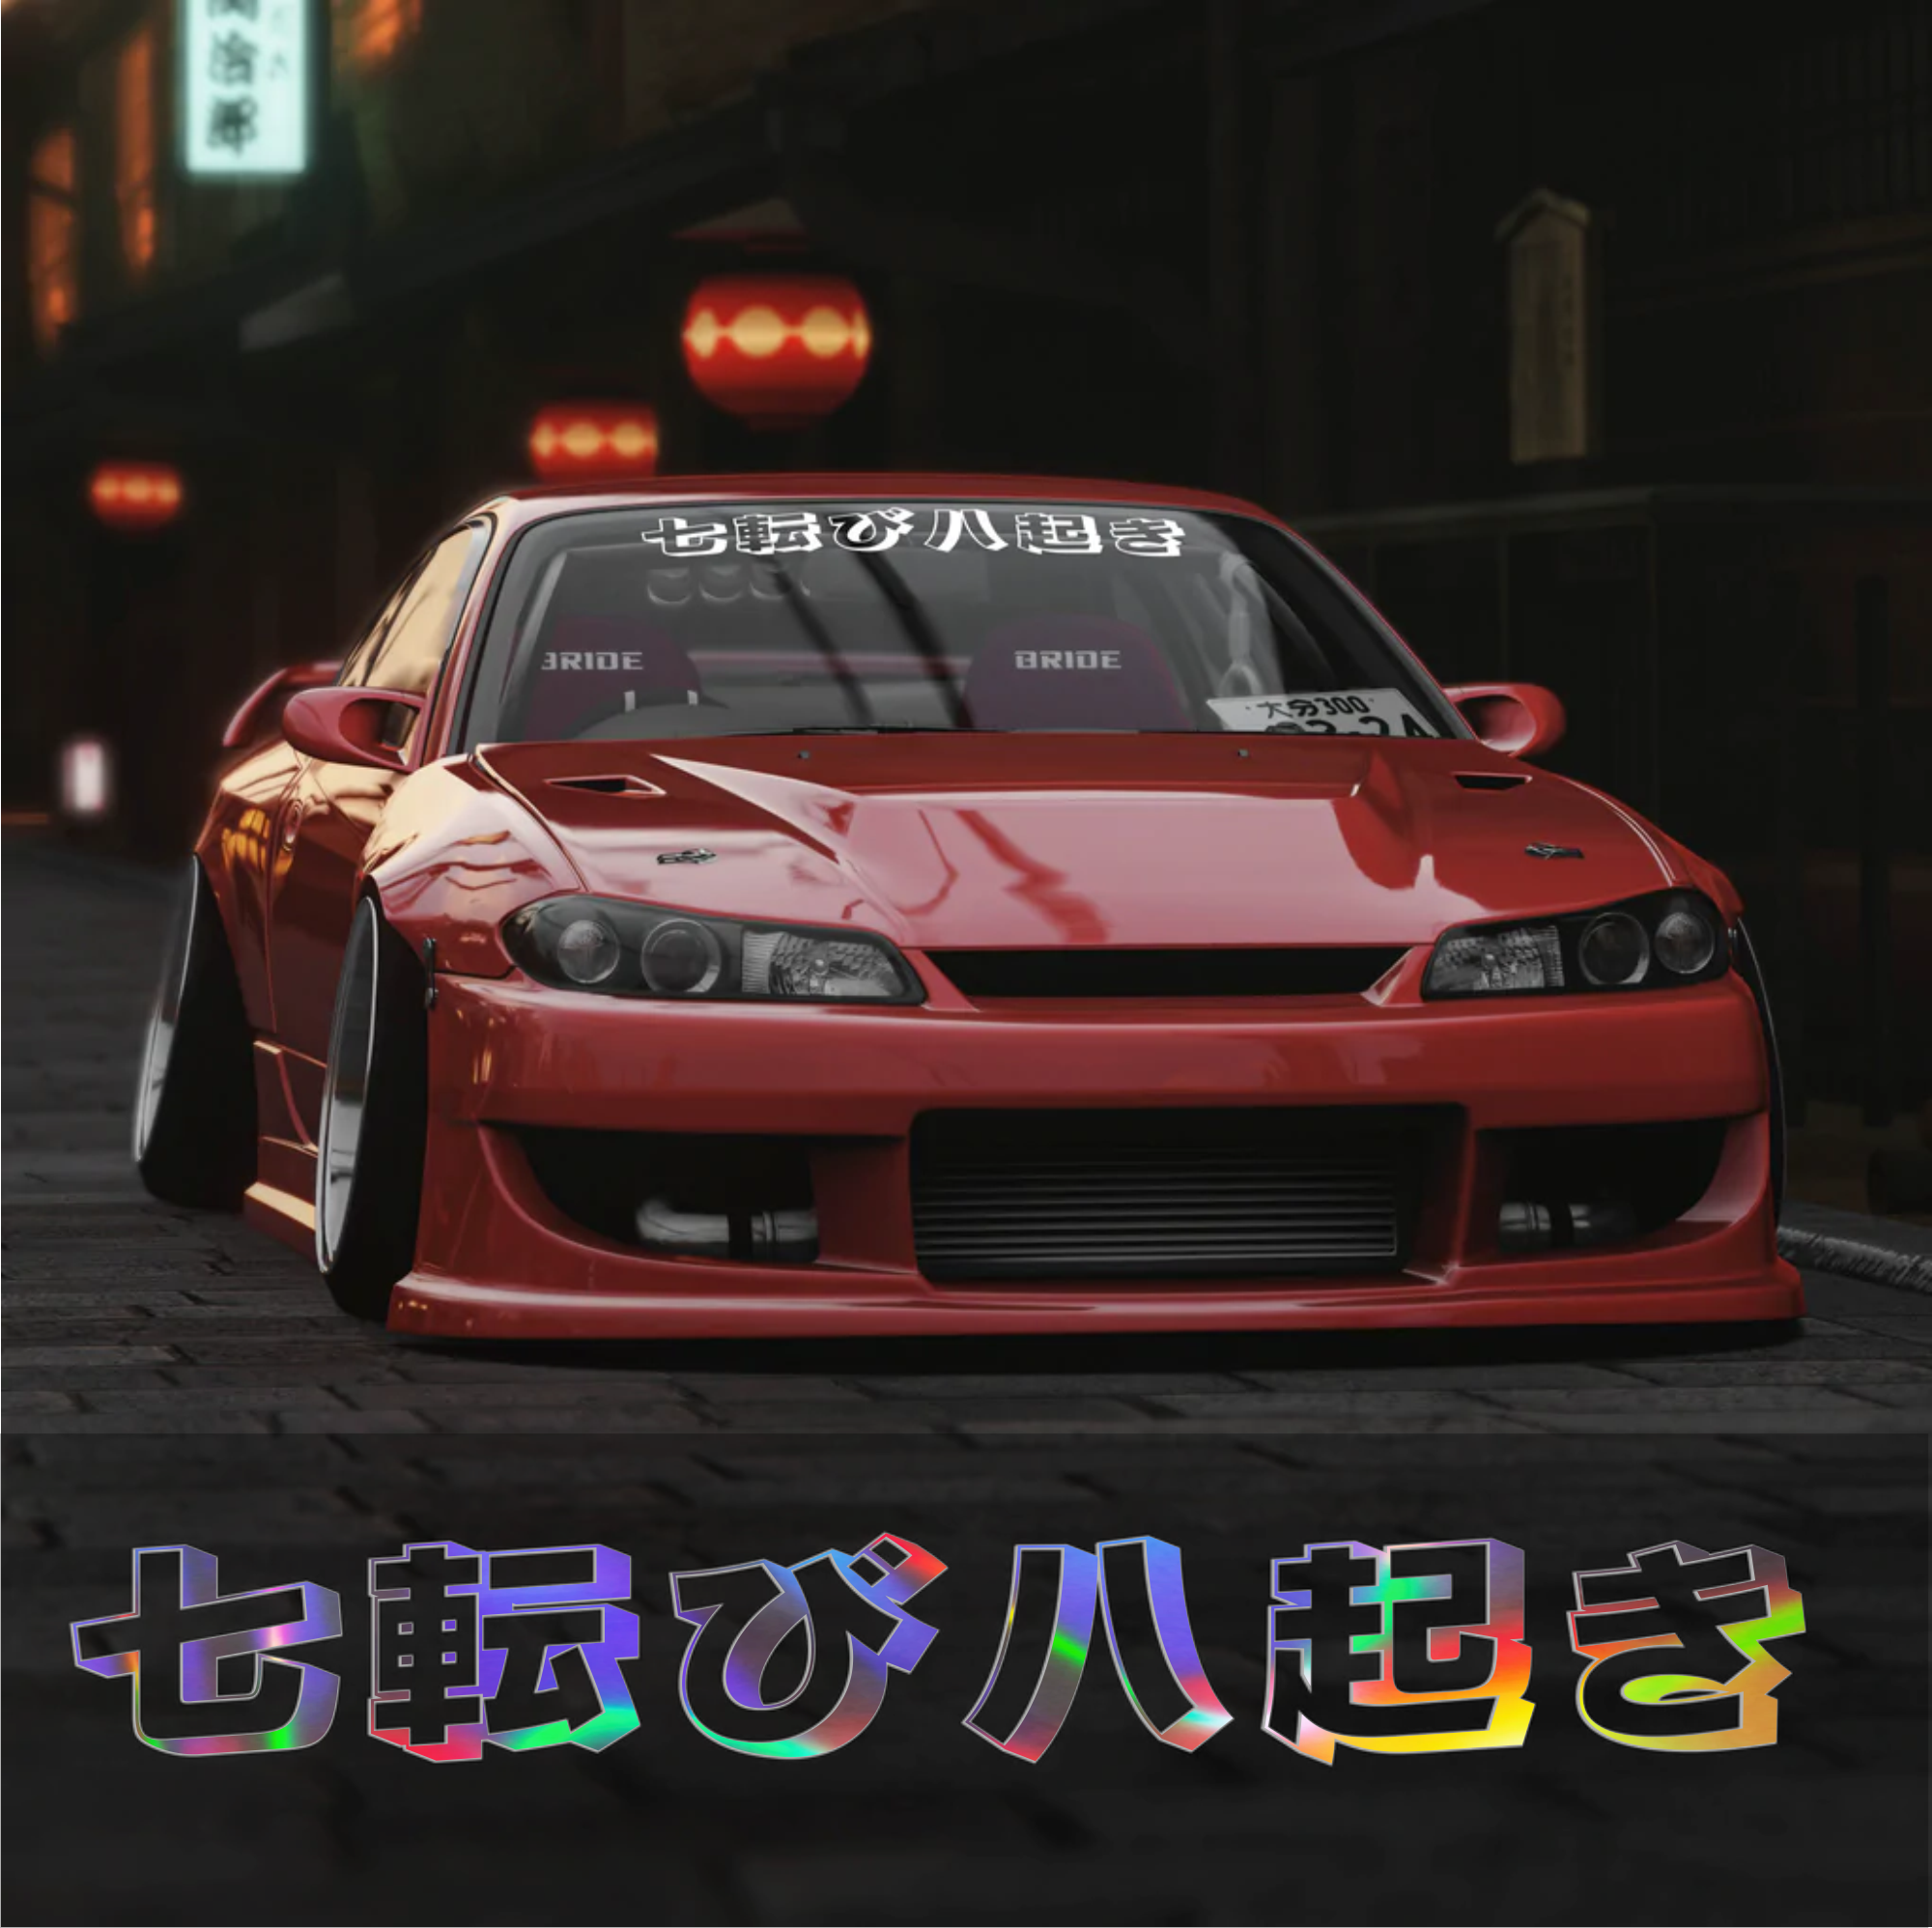 Never Giving Up in japanese car banner decal